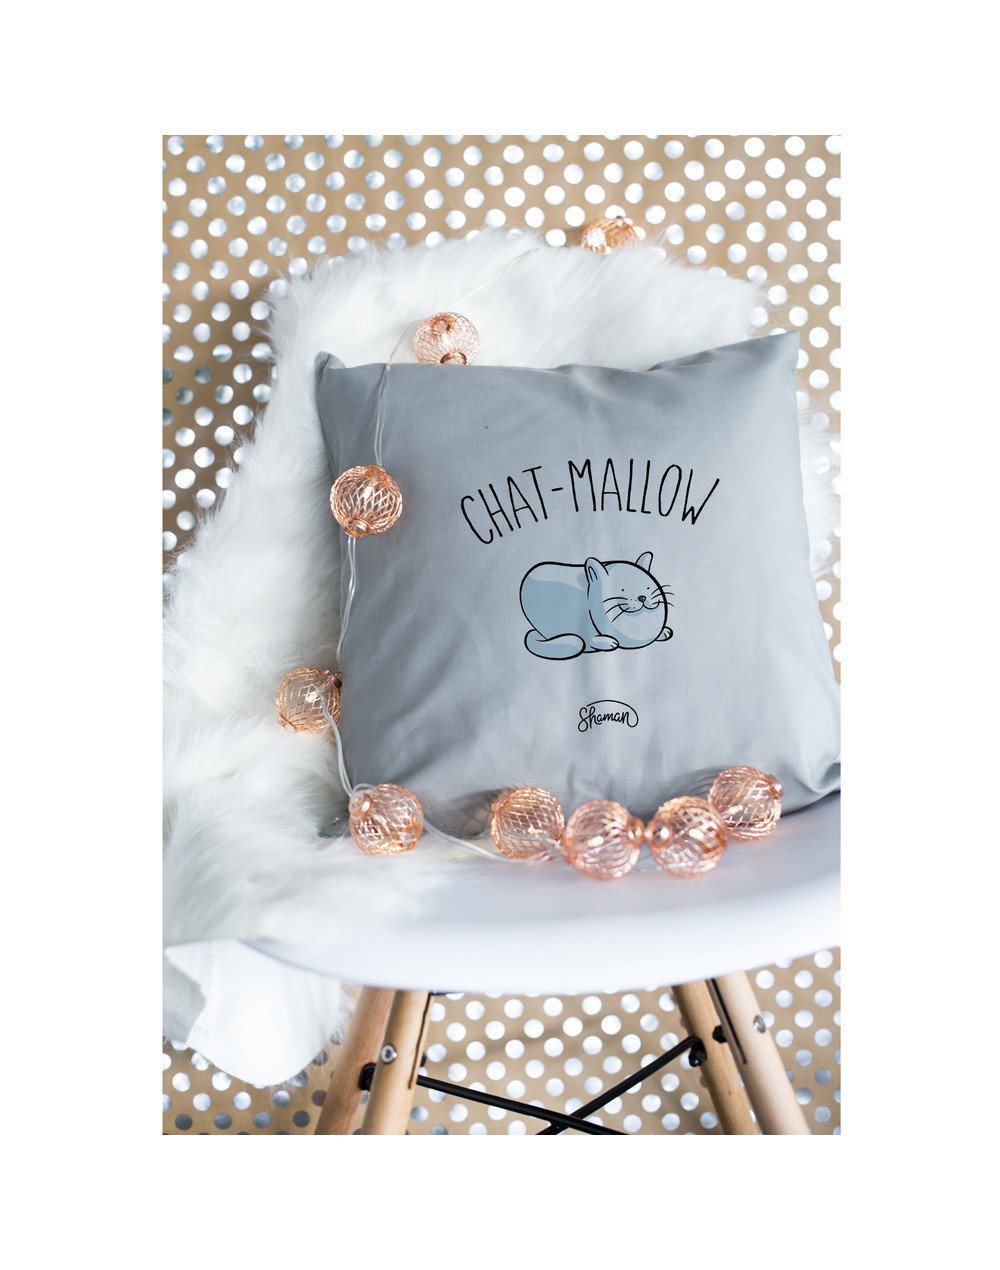 Coussin "chat mallow"